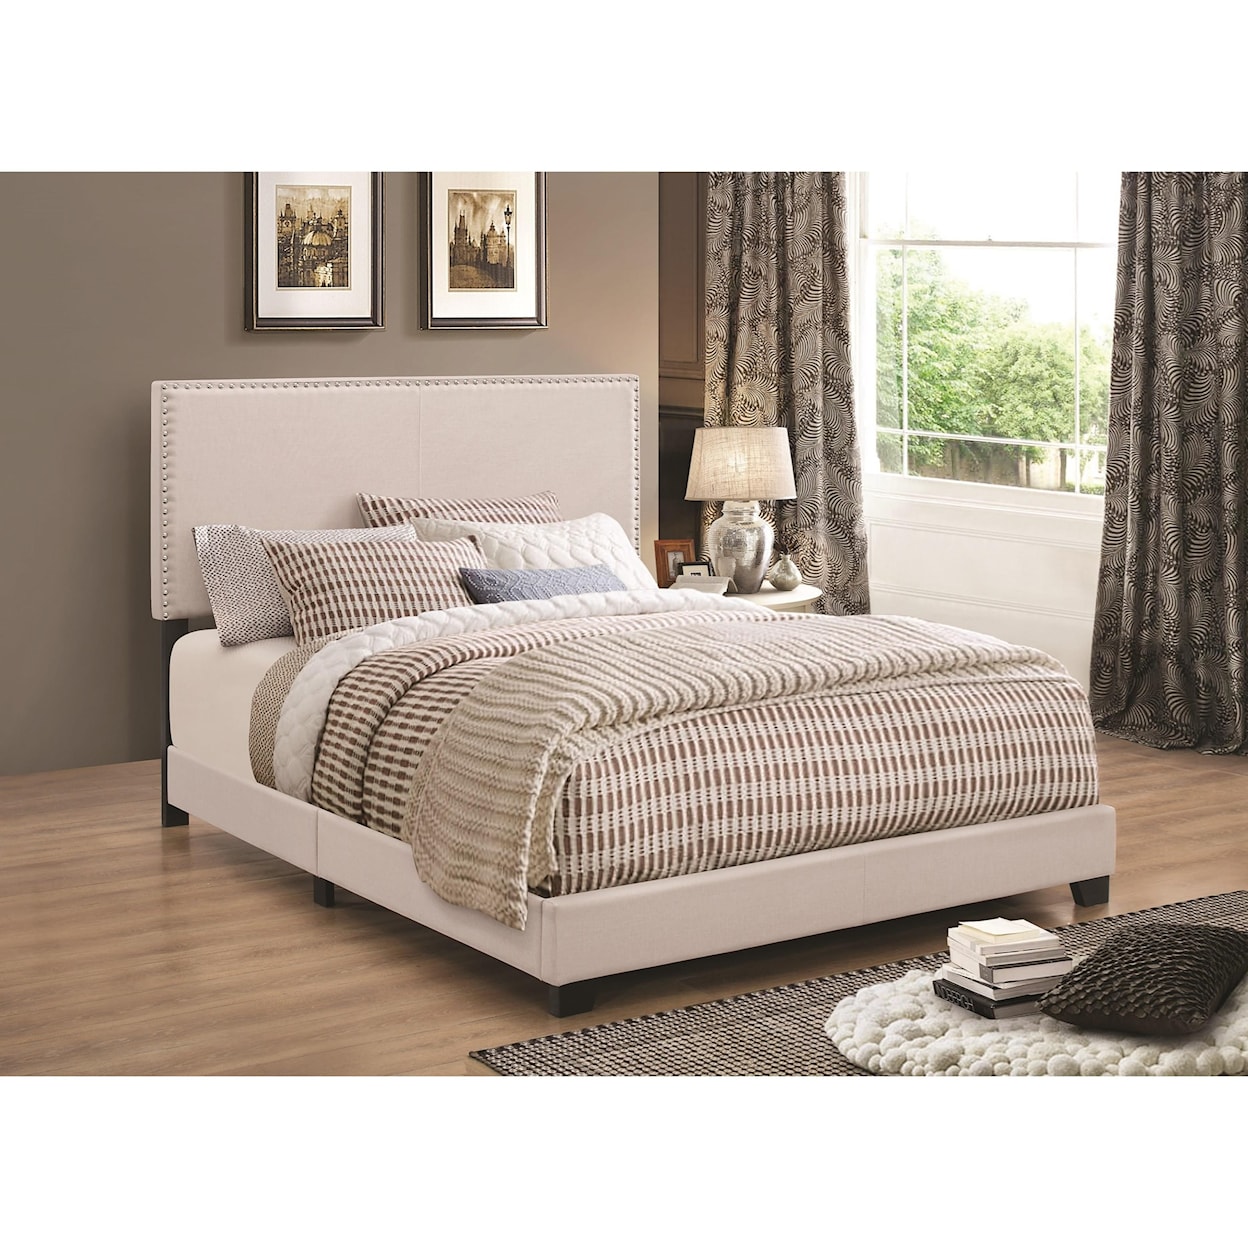 Michael Alan CSR Select Upholstered Beds Cal King Bed